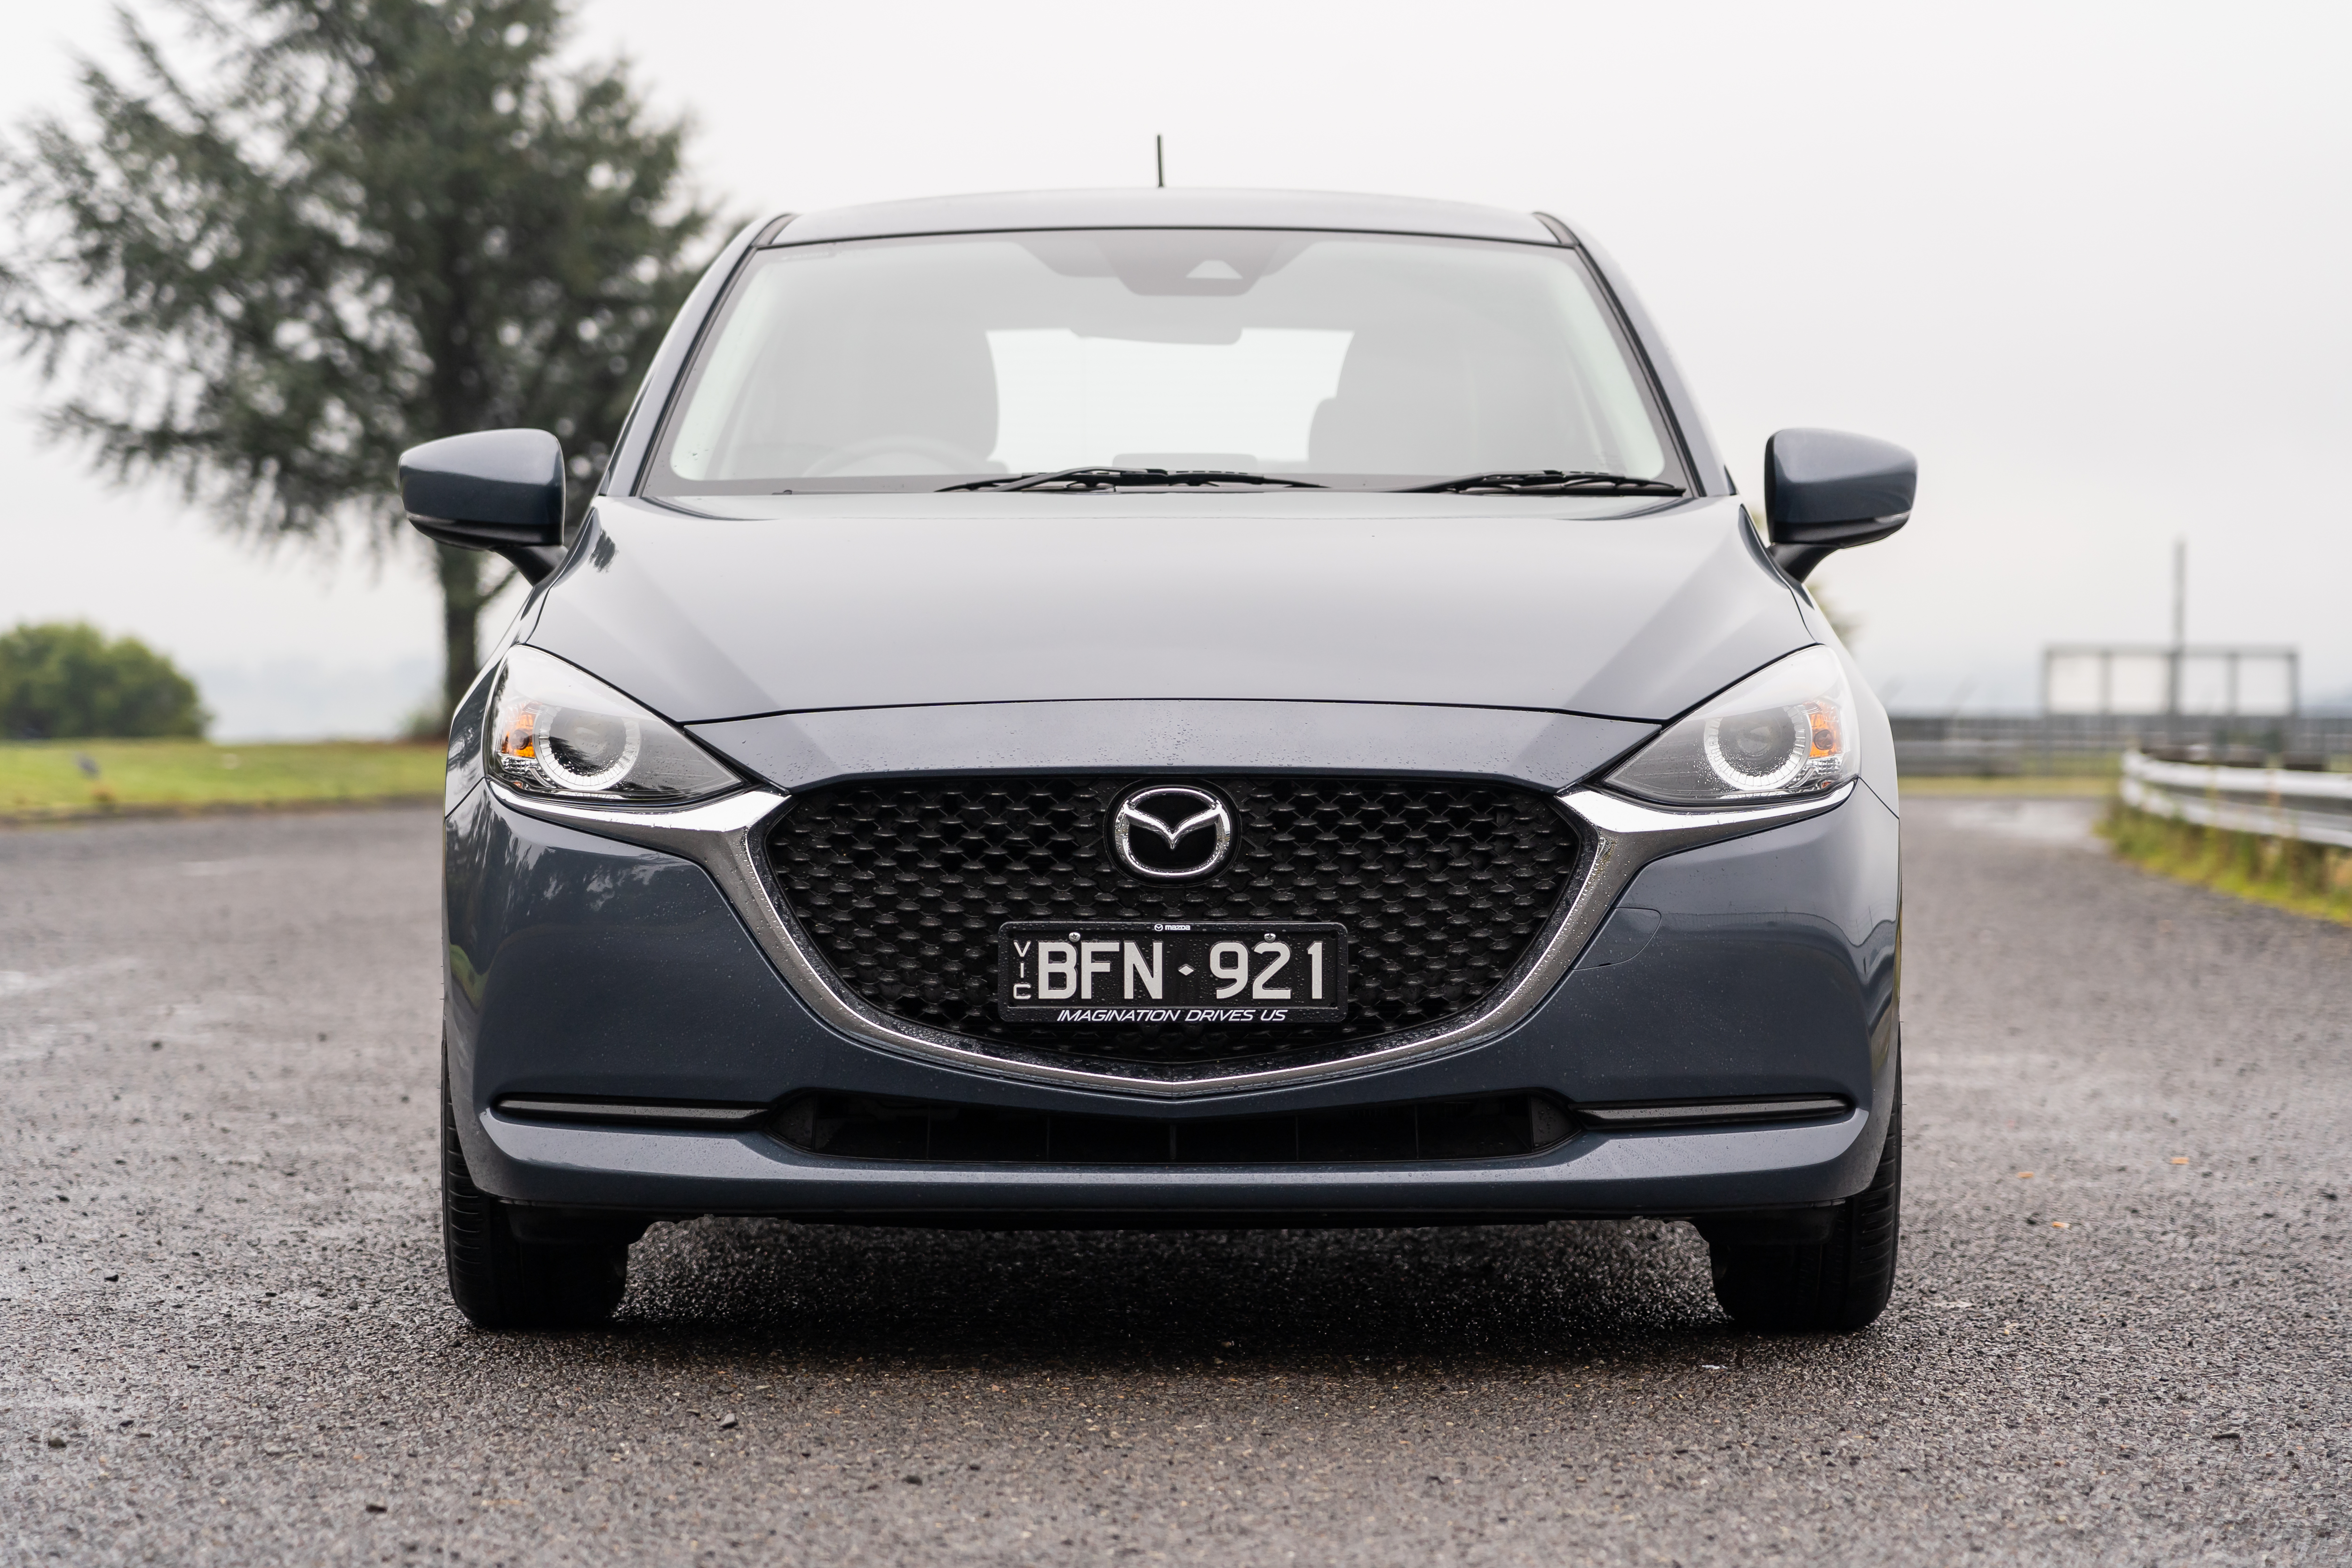 2020 Mazda 2 G15 Pure review